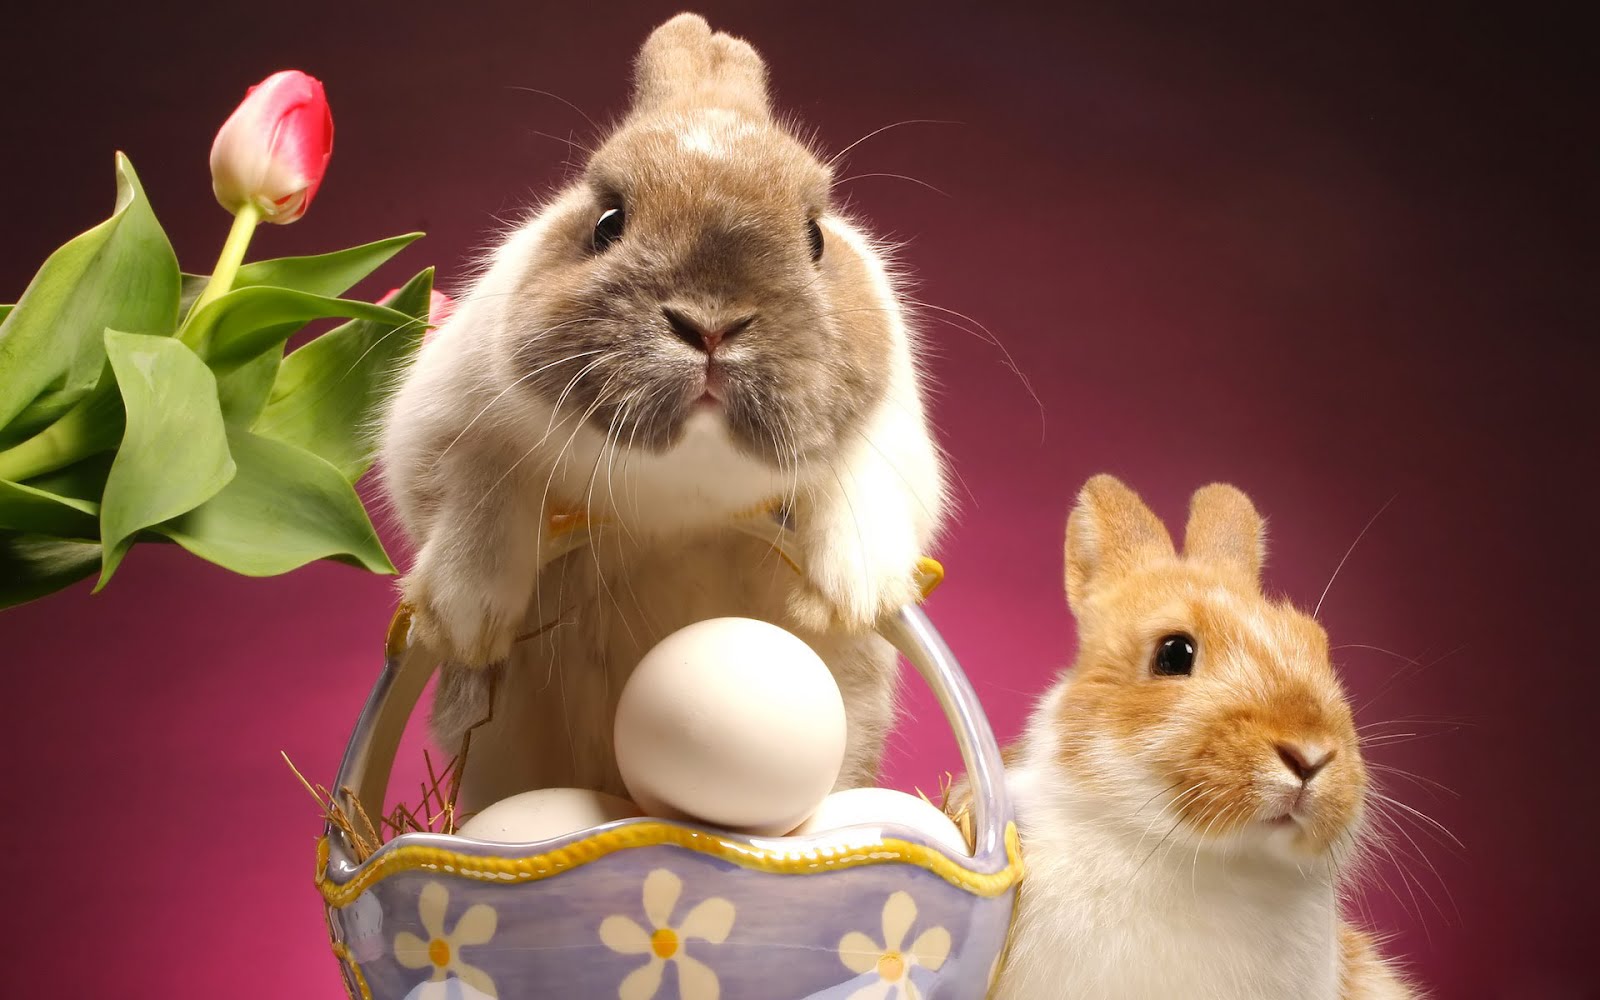 6 Cute Bunny Rabbit Easter Wallpapers for Desktop | Free Christian ...